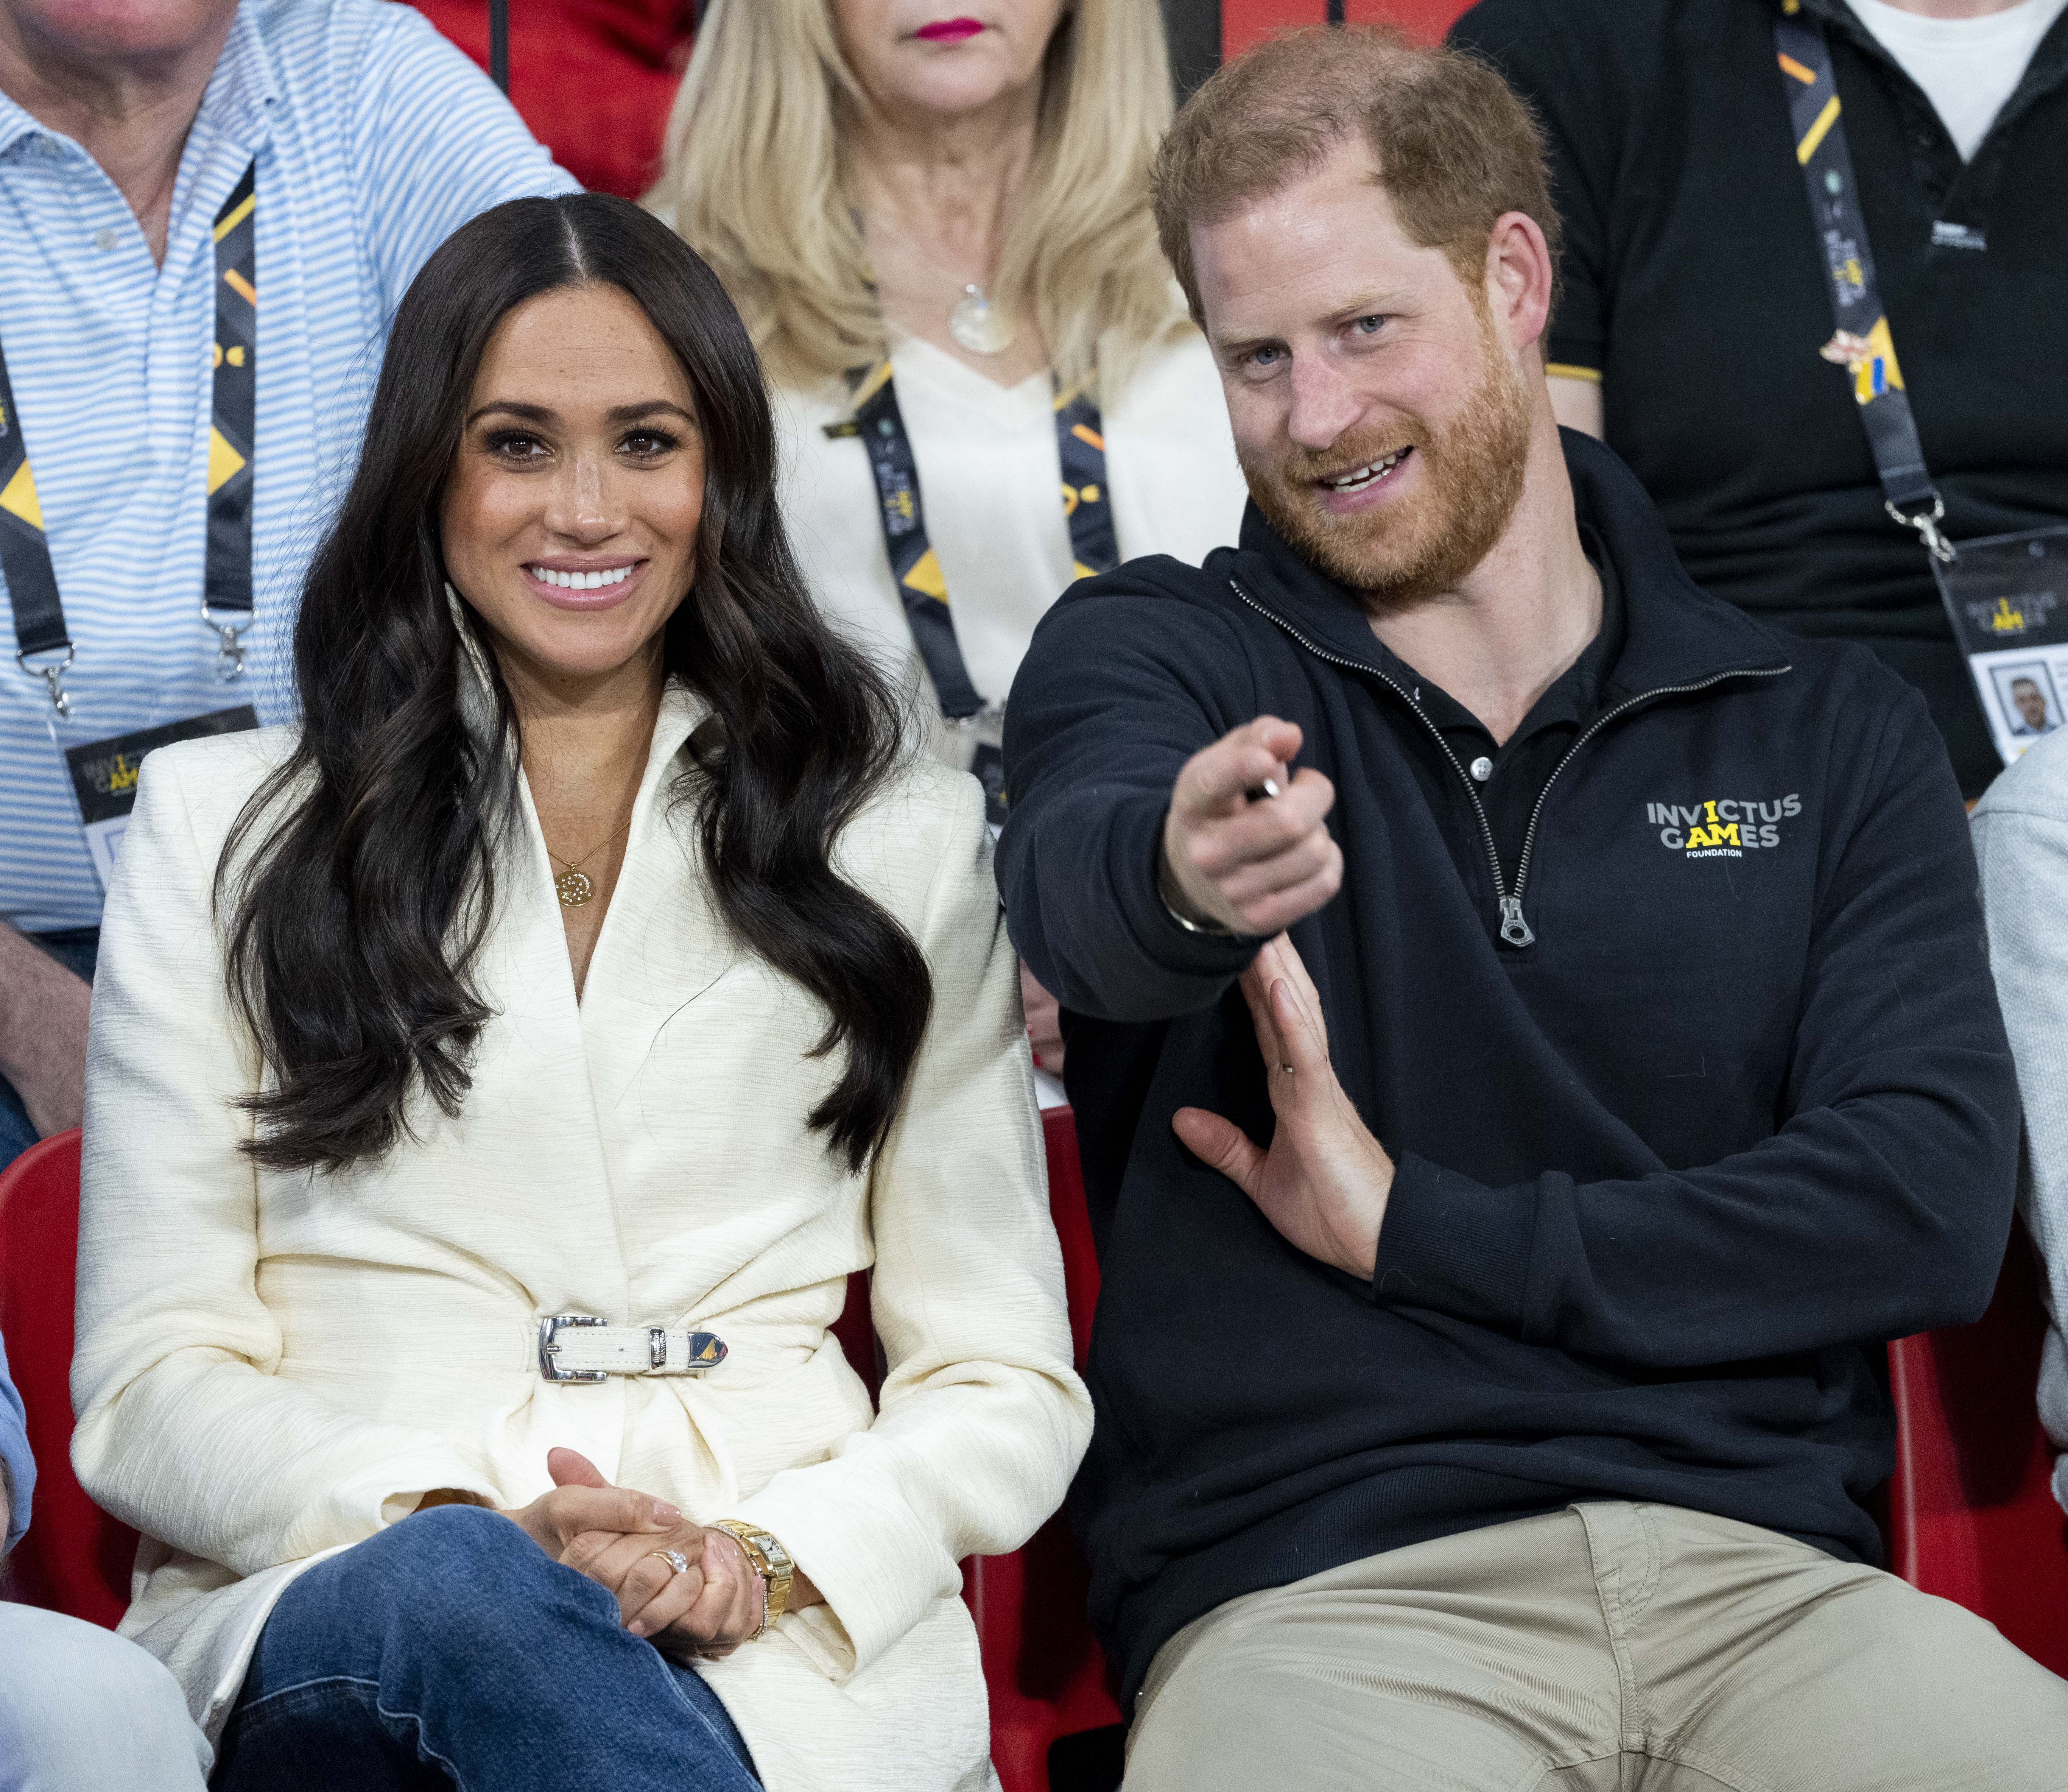 Meghan, Duchess of Sussex and Prince Harry, Duke of Sussex at a sitting volleyball game during the Invictus Games. April 17, 2022 in The Hague, Netherlands. | Source: Getty Images